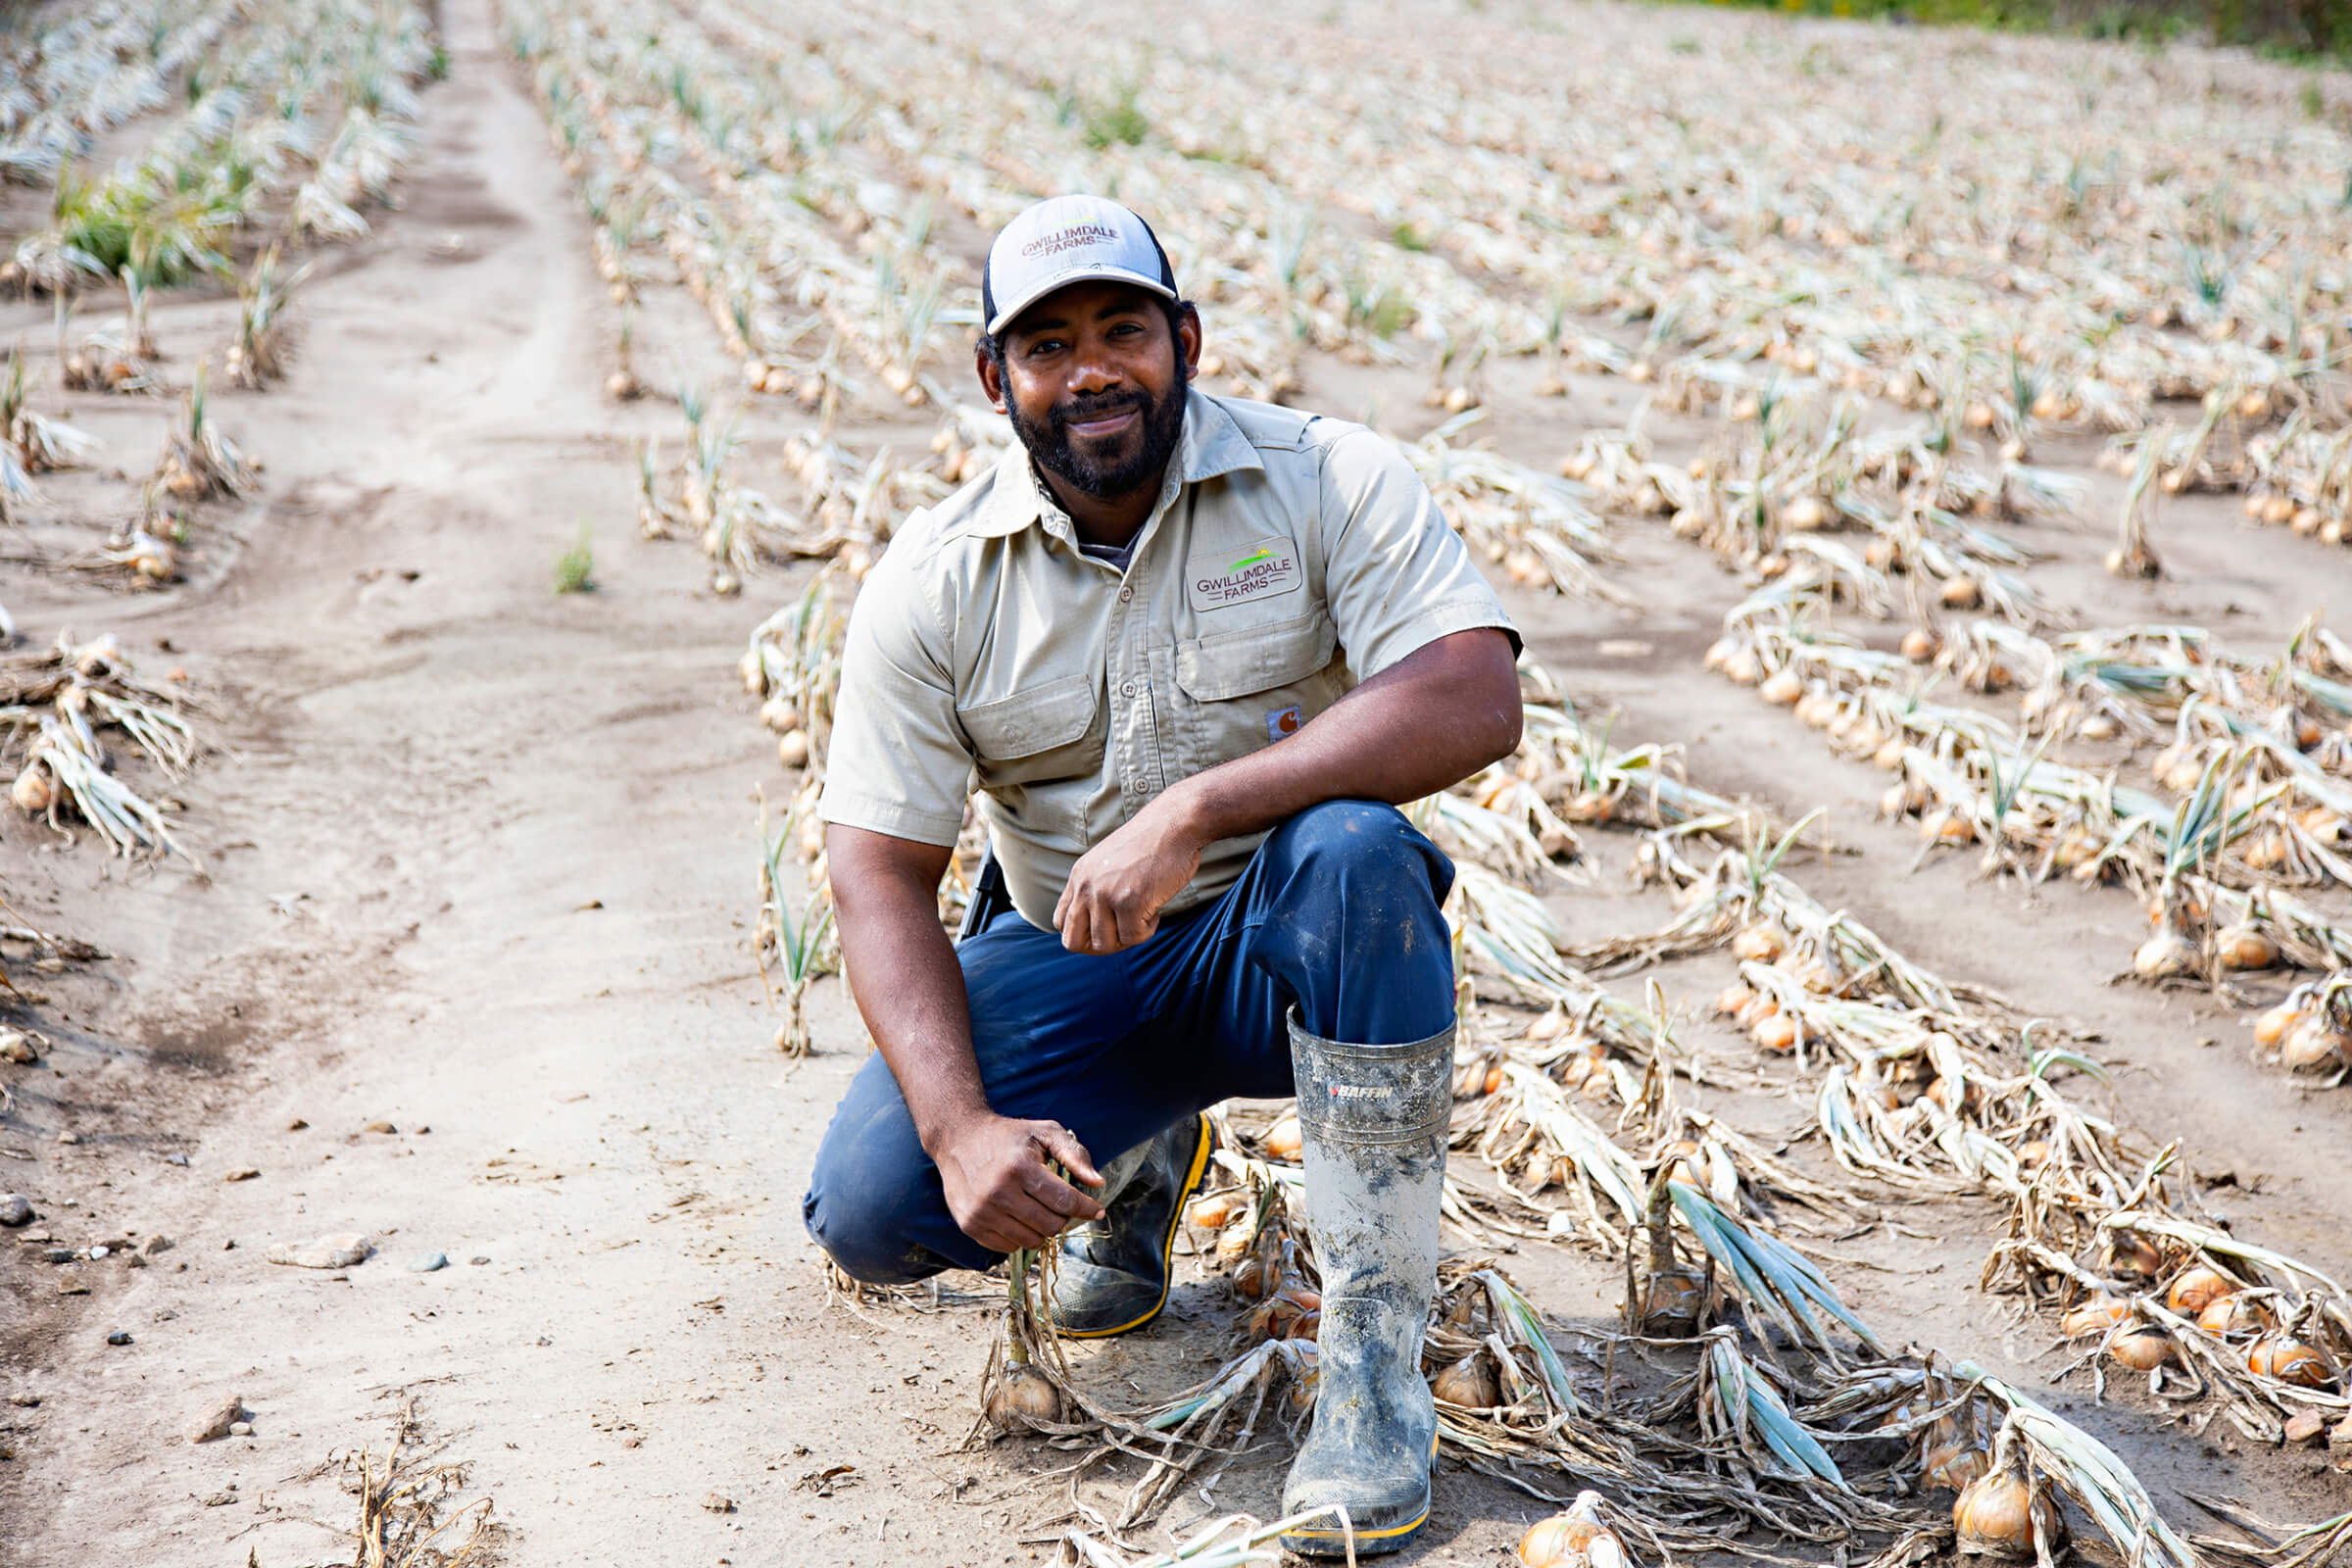 Ryan, Seasonal Agricultural Worker from Trinidad and Tobago